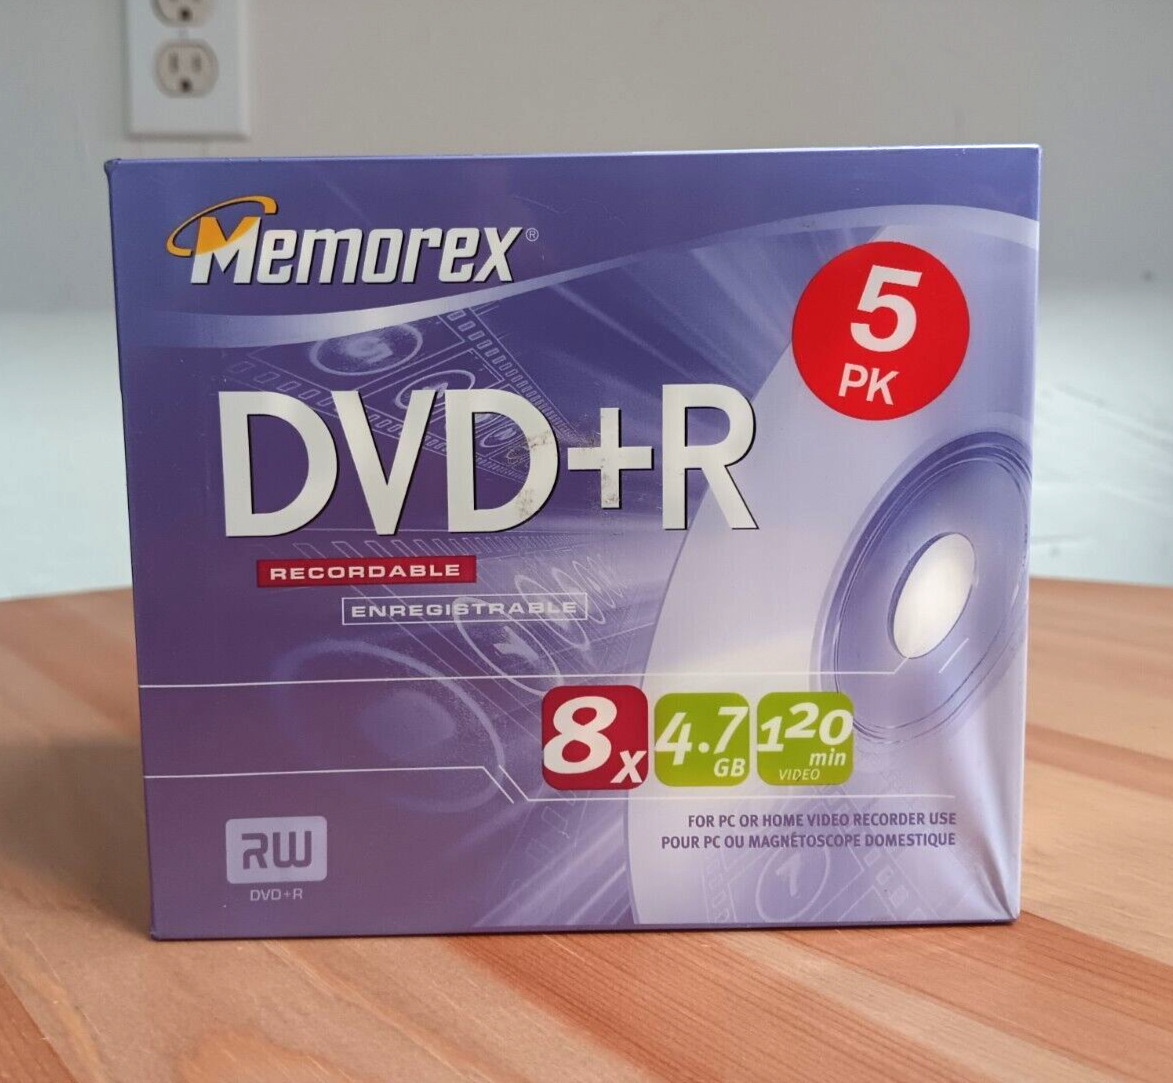 Memorex DVD+R 5 Pack 8X 4.7GB Recordable RW 120 Minutes Factory Sealed